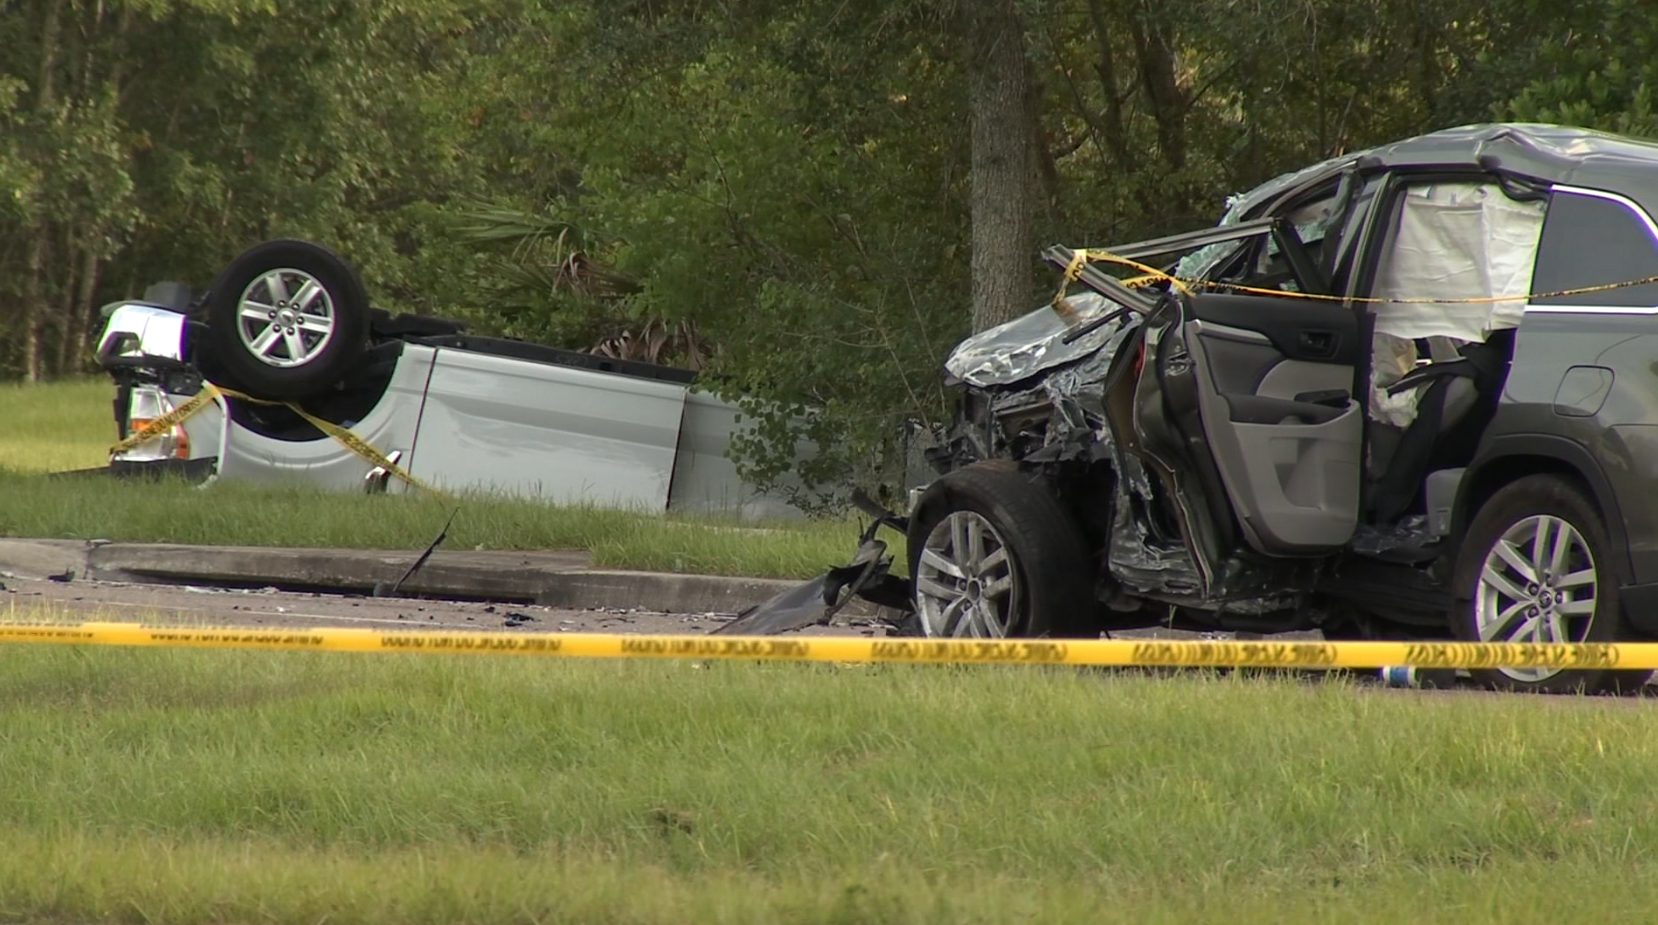 48+ Fatal car accident in orlando florida today info